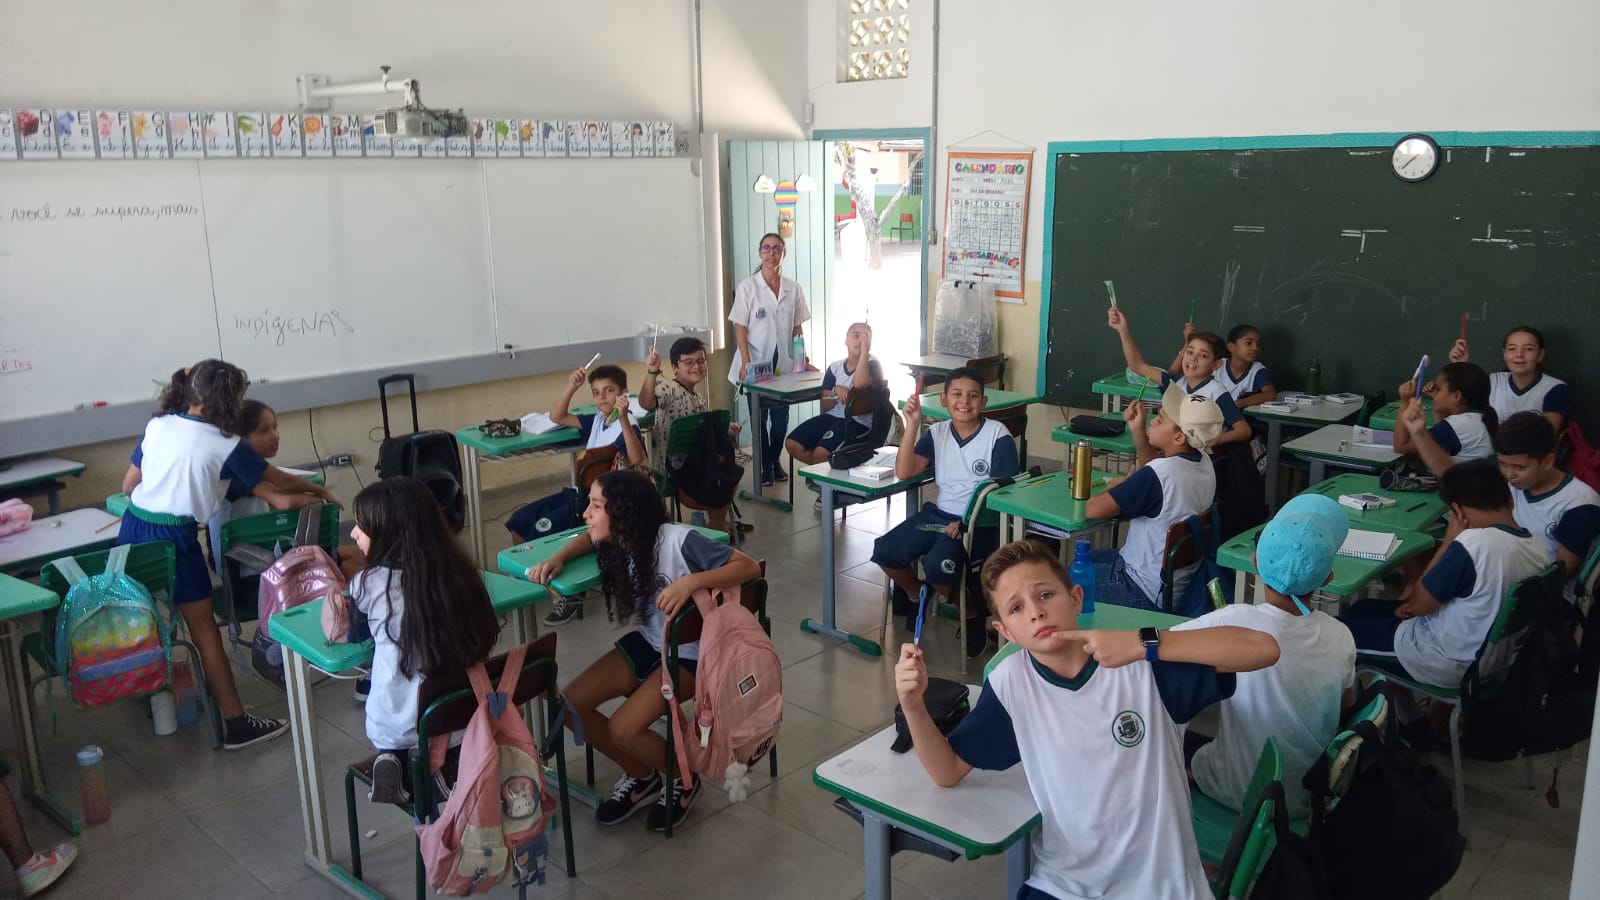 PSF Feital carries out oral health action with students from the neighborhood’s Municipal School